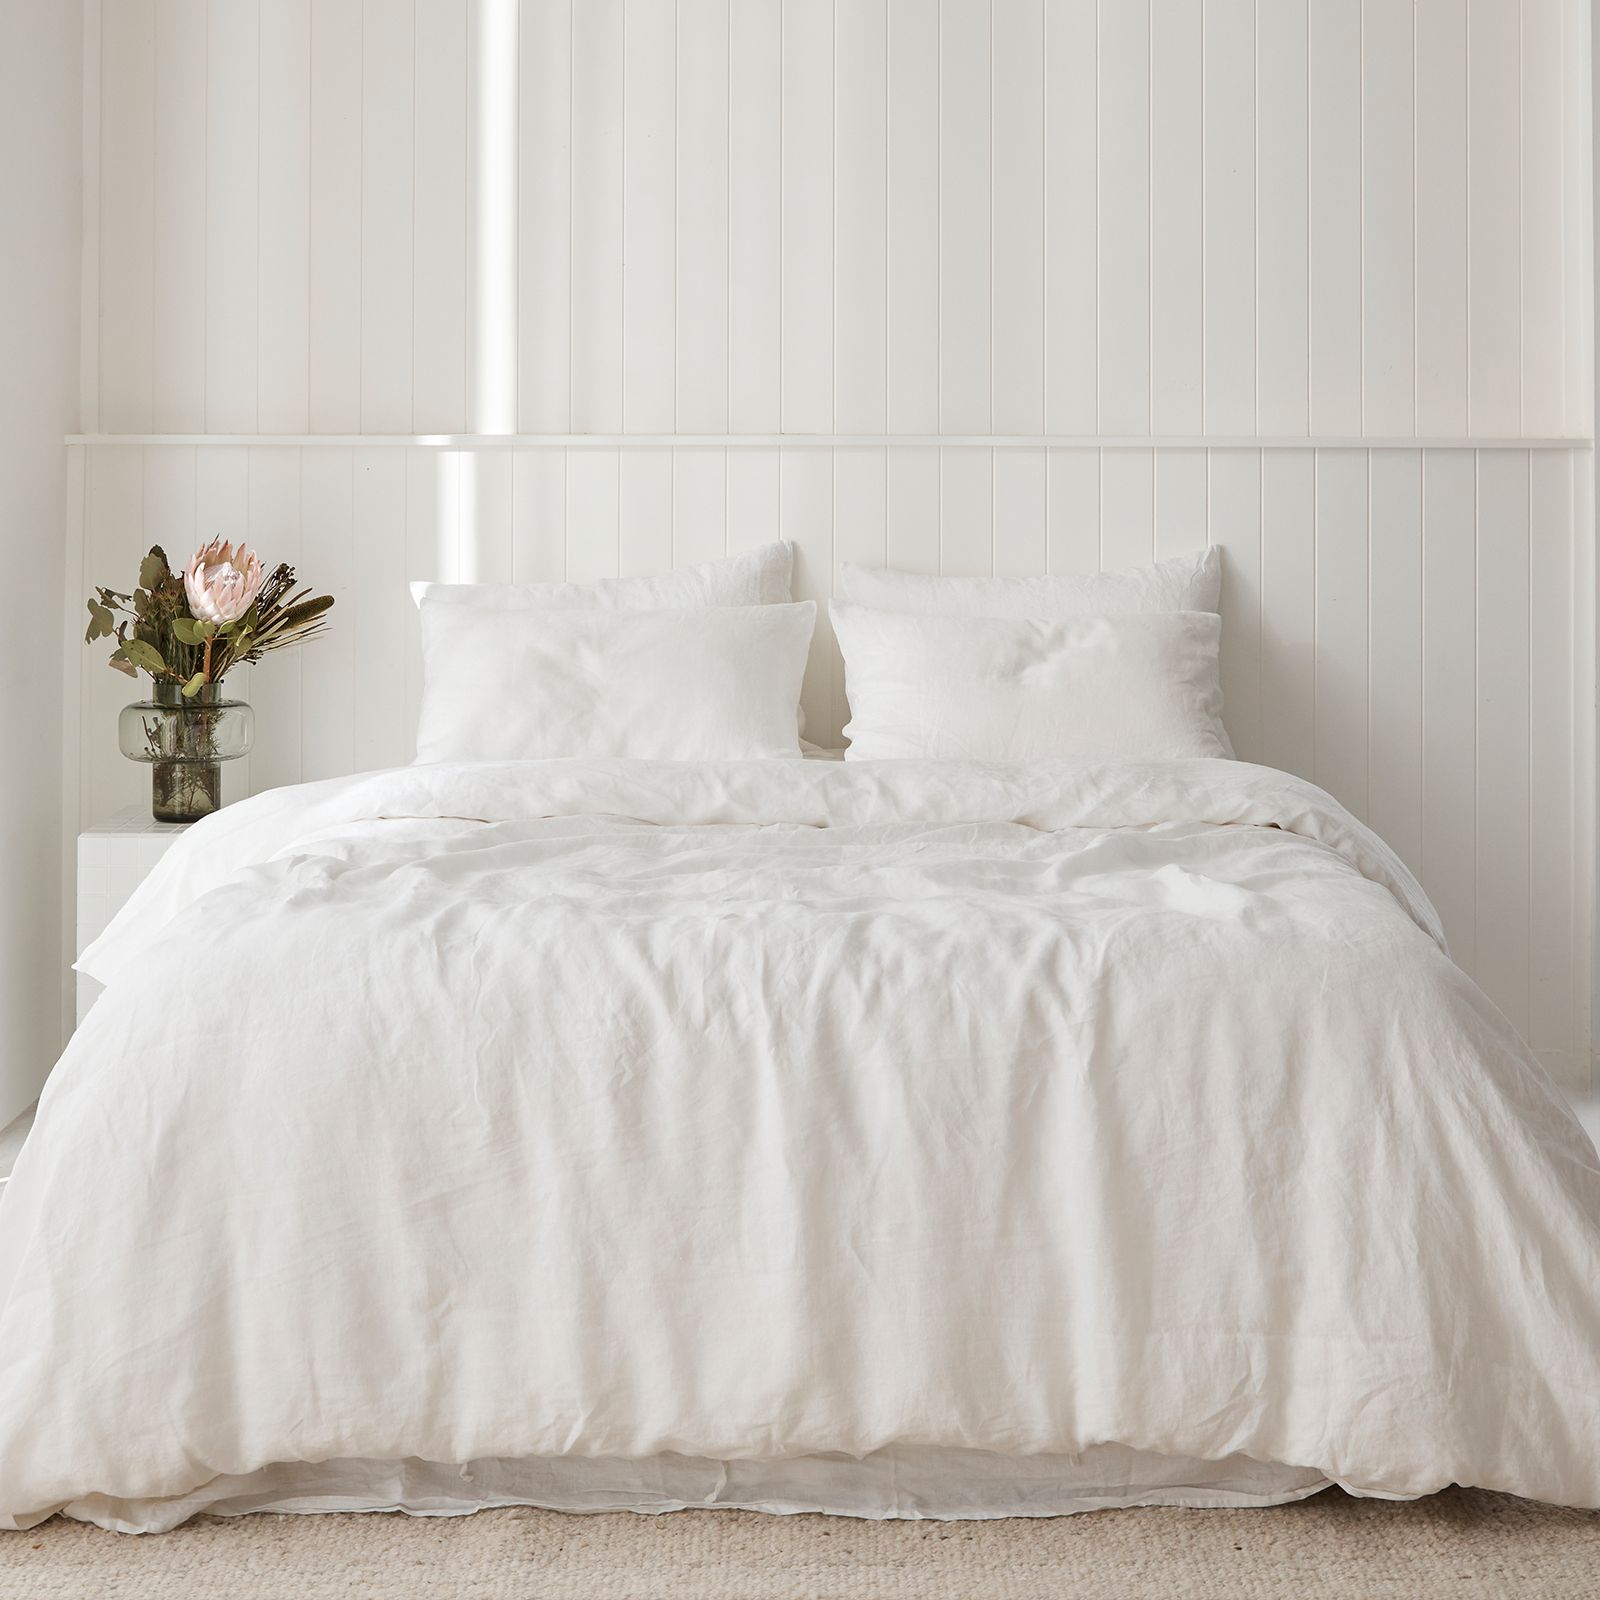 100% pure French linen Duvet Cover in White